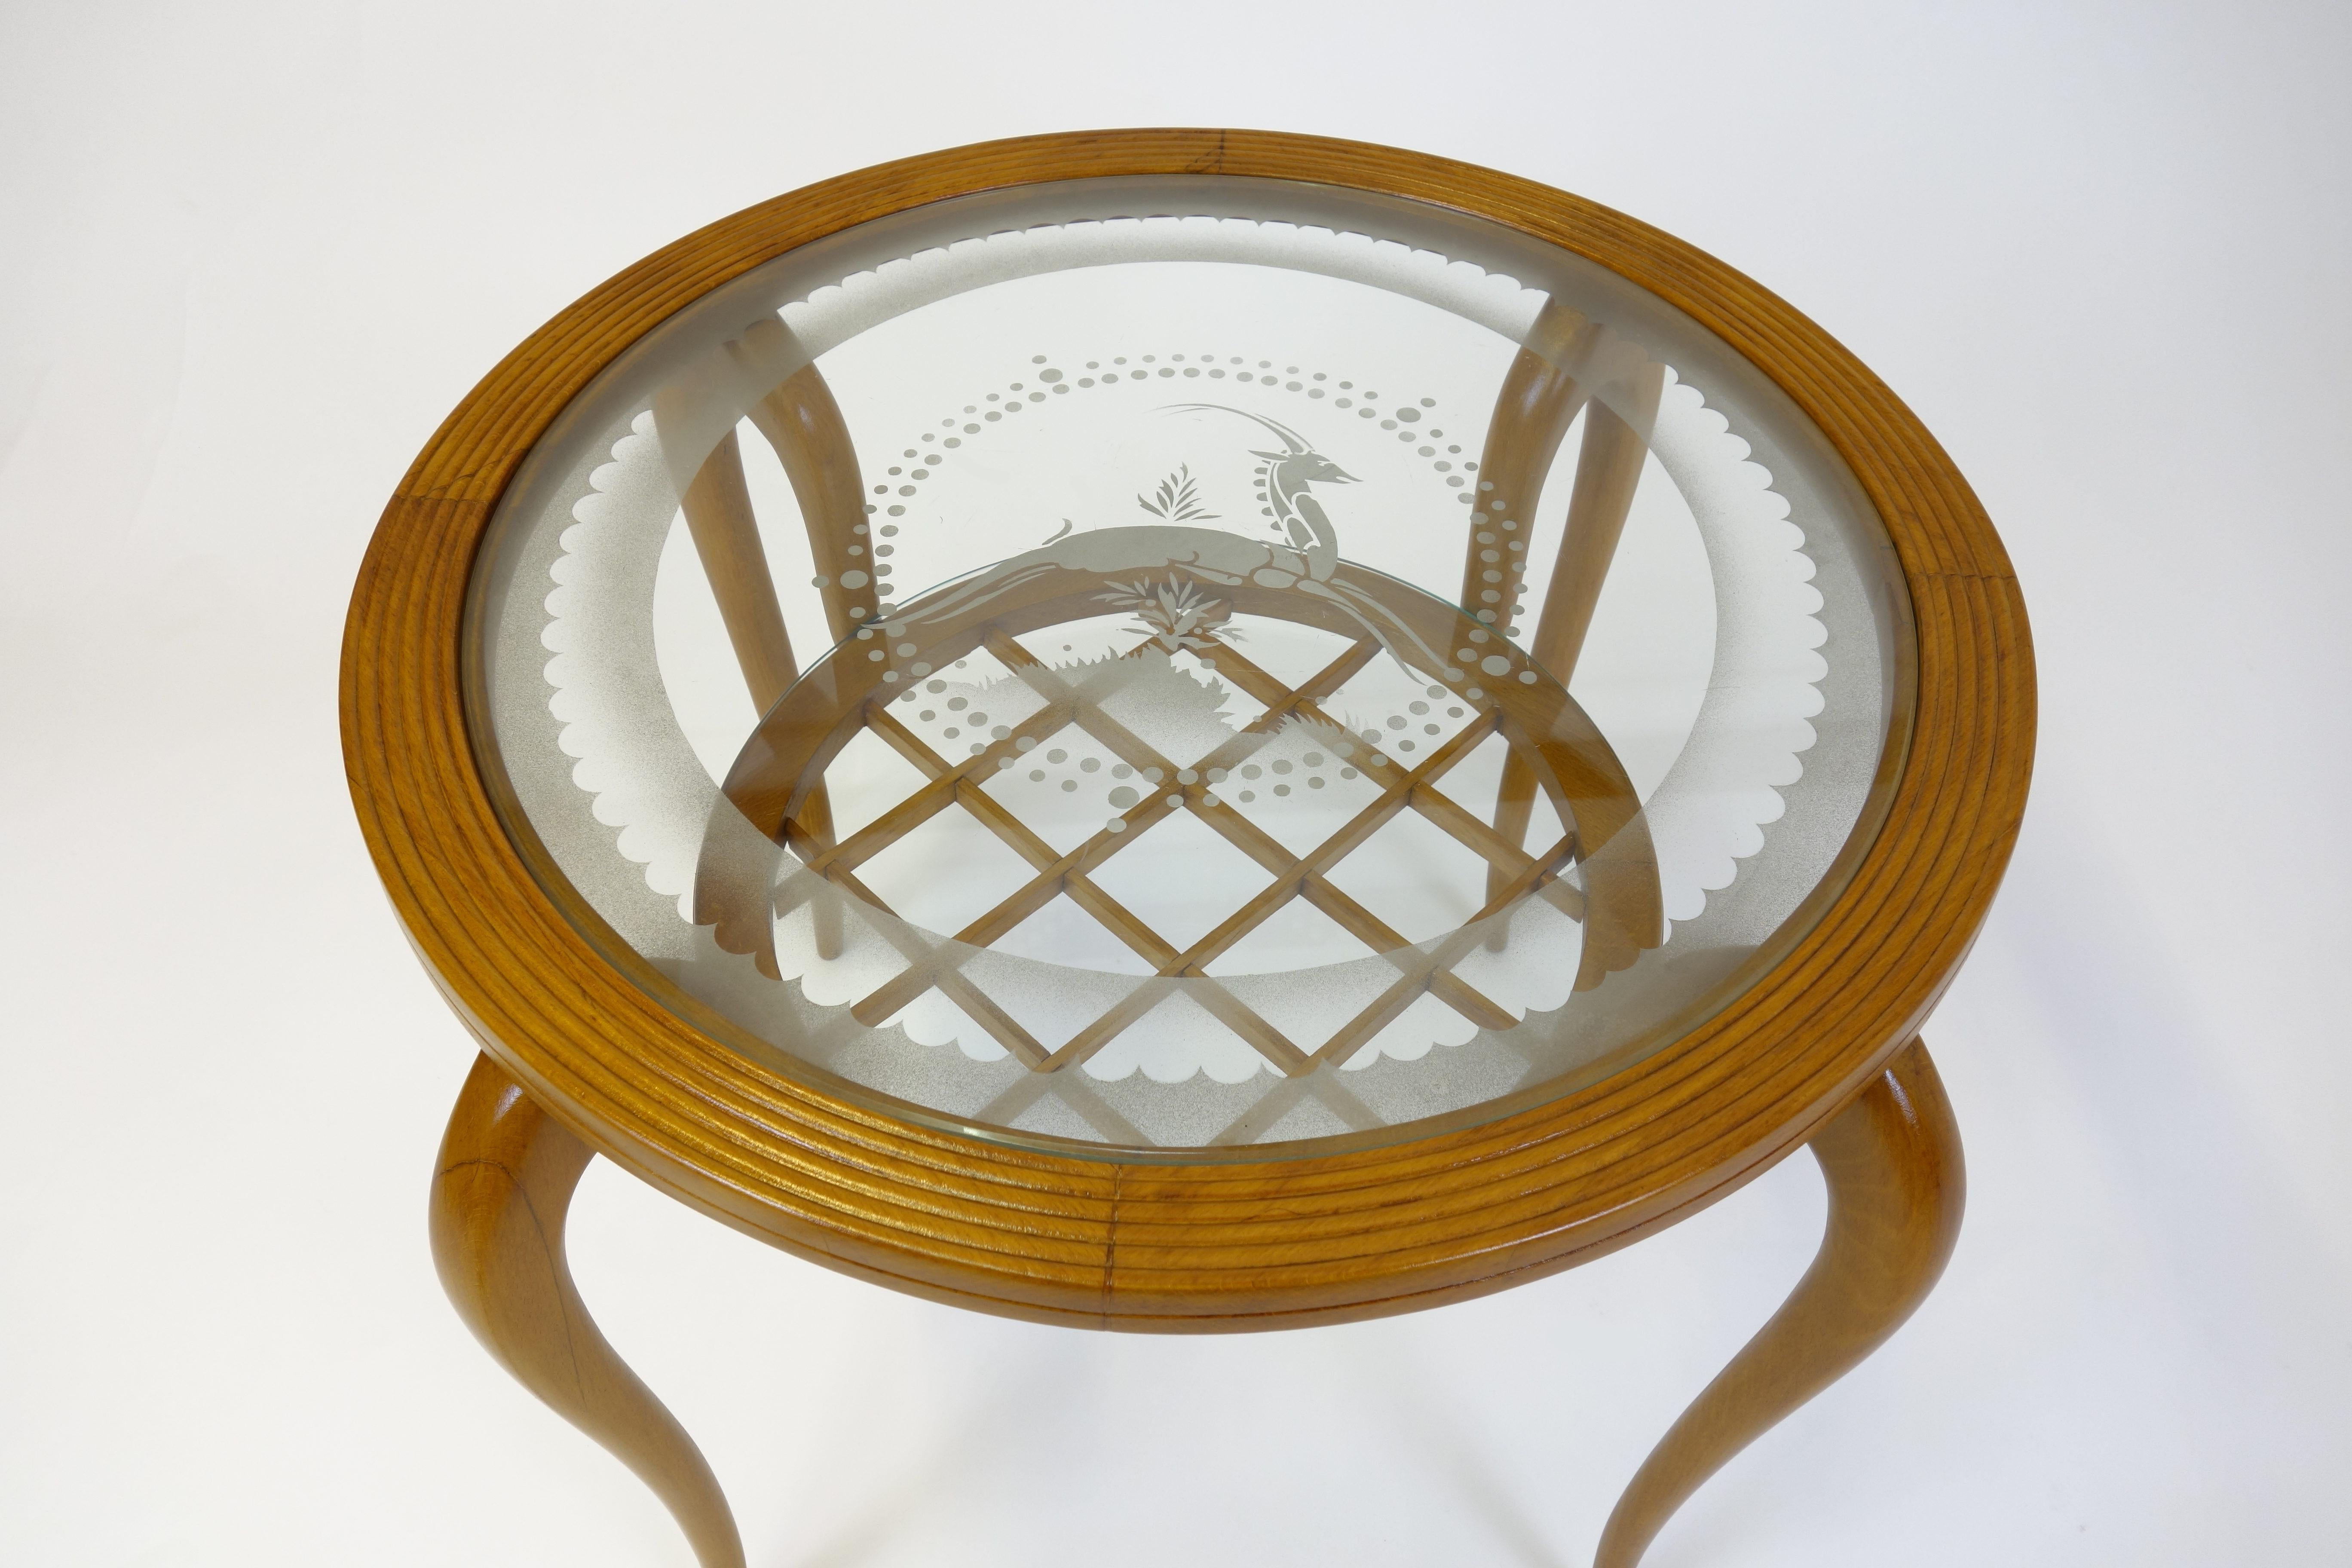 Italian Sidetable in the Manner of Gio Ponti Carved Wood Etched Glass Motive Italy 1940s For Sale